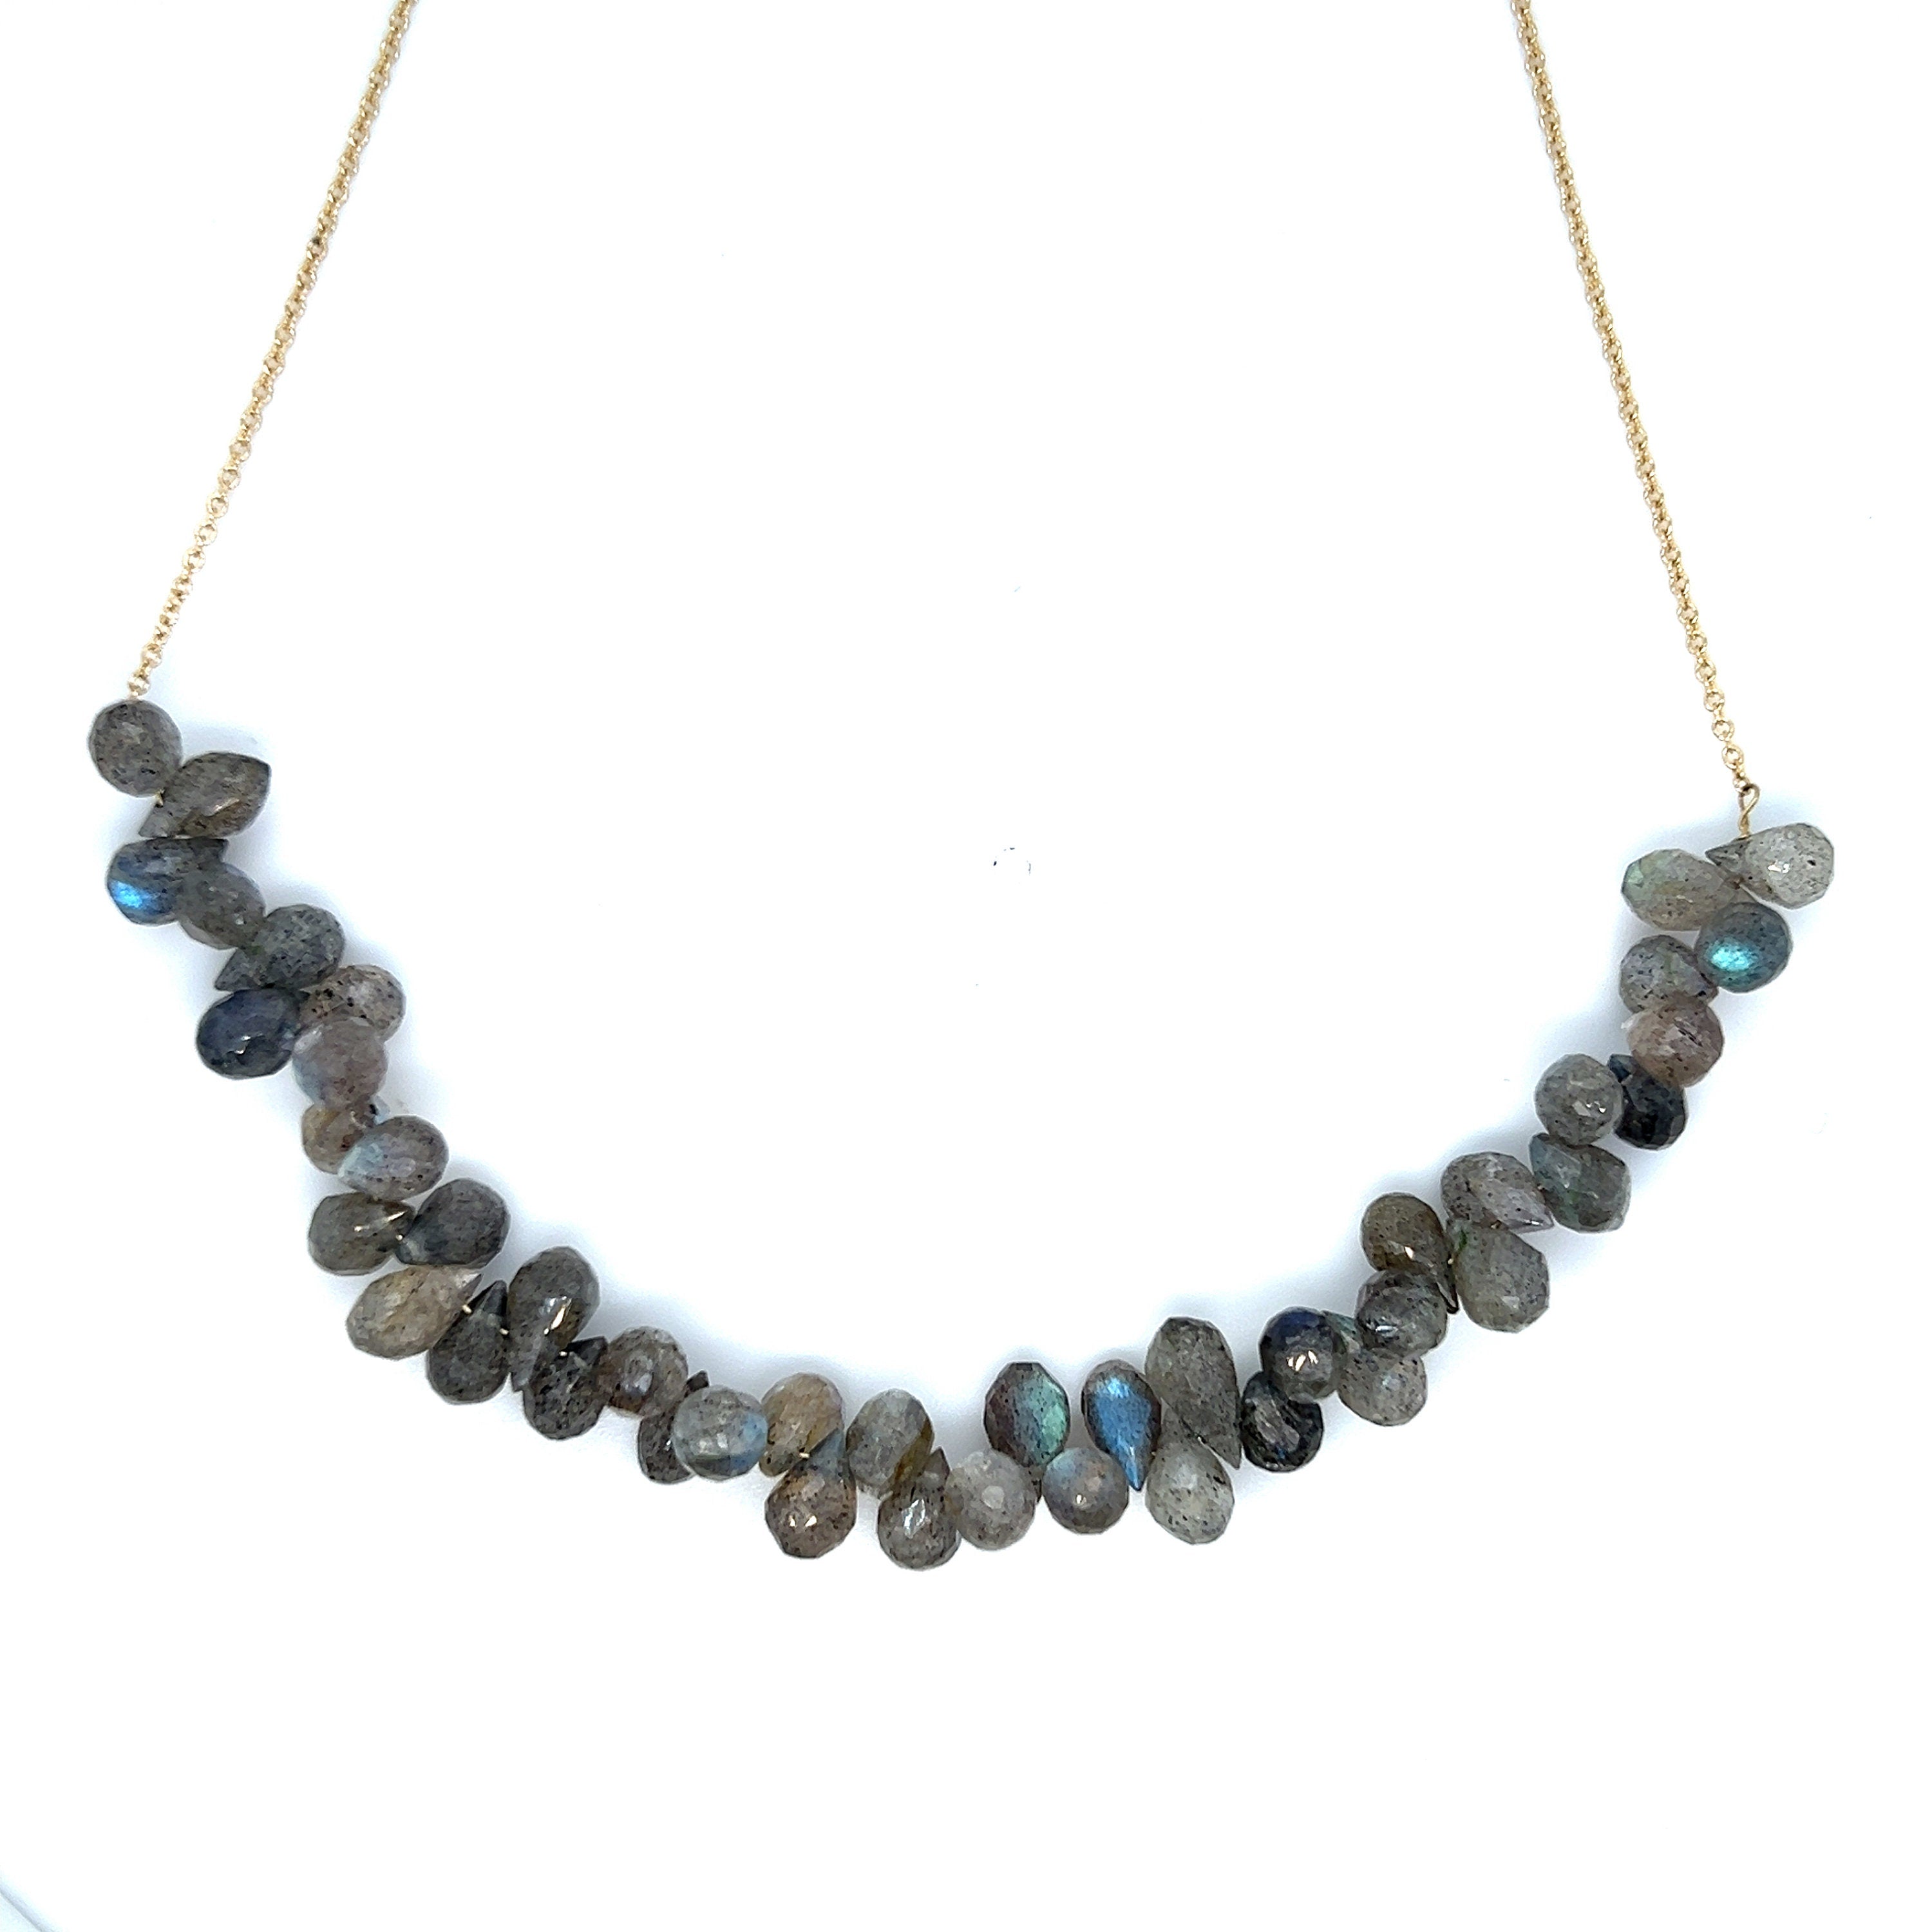 Solid 18K Yellow Gold Labradorite Necklace - 10CTS